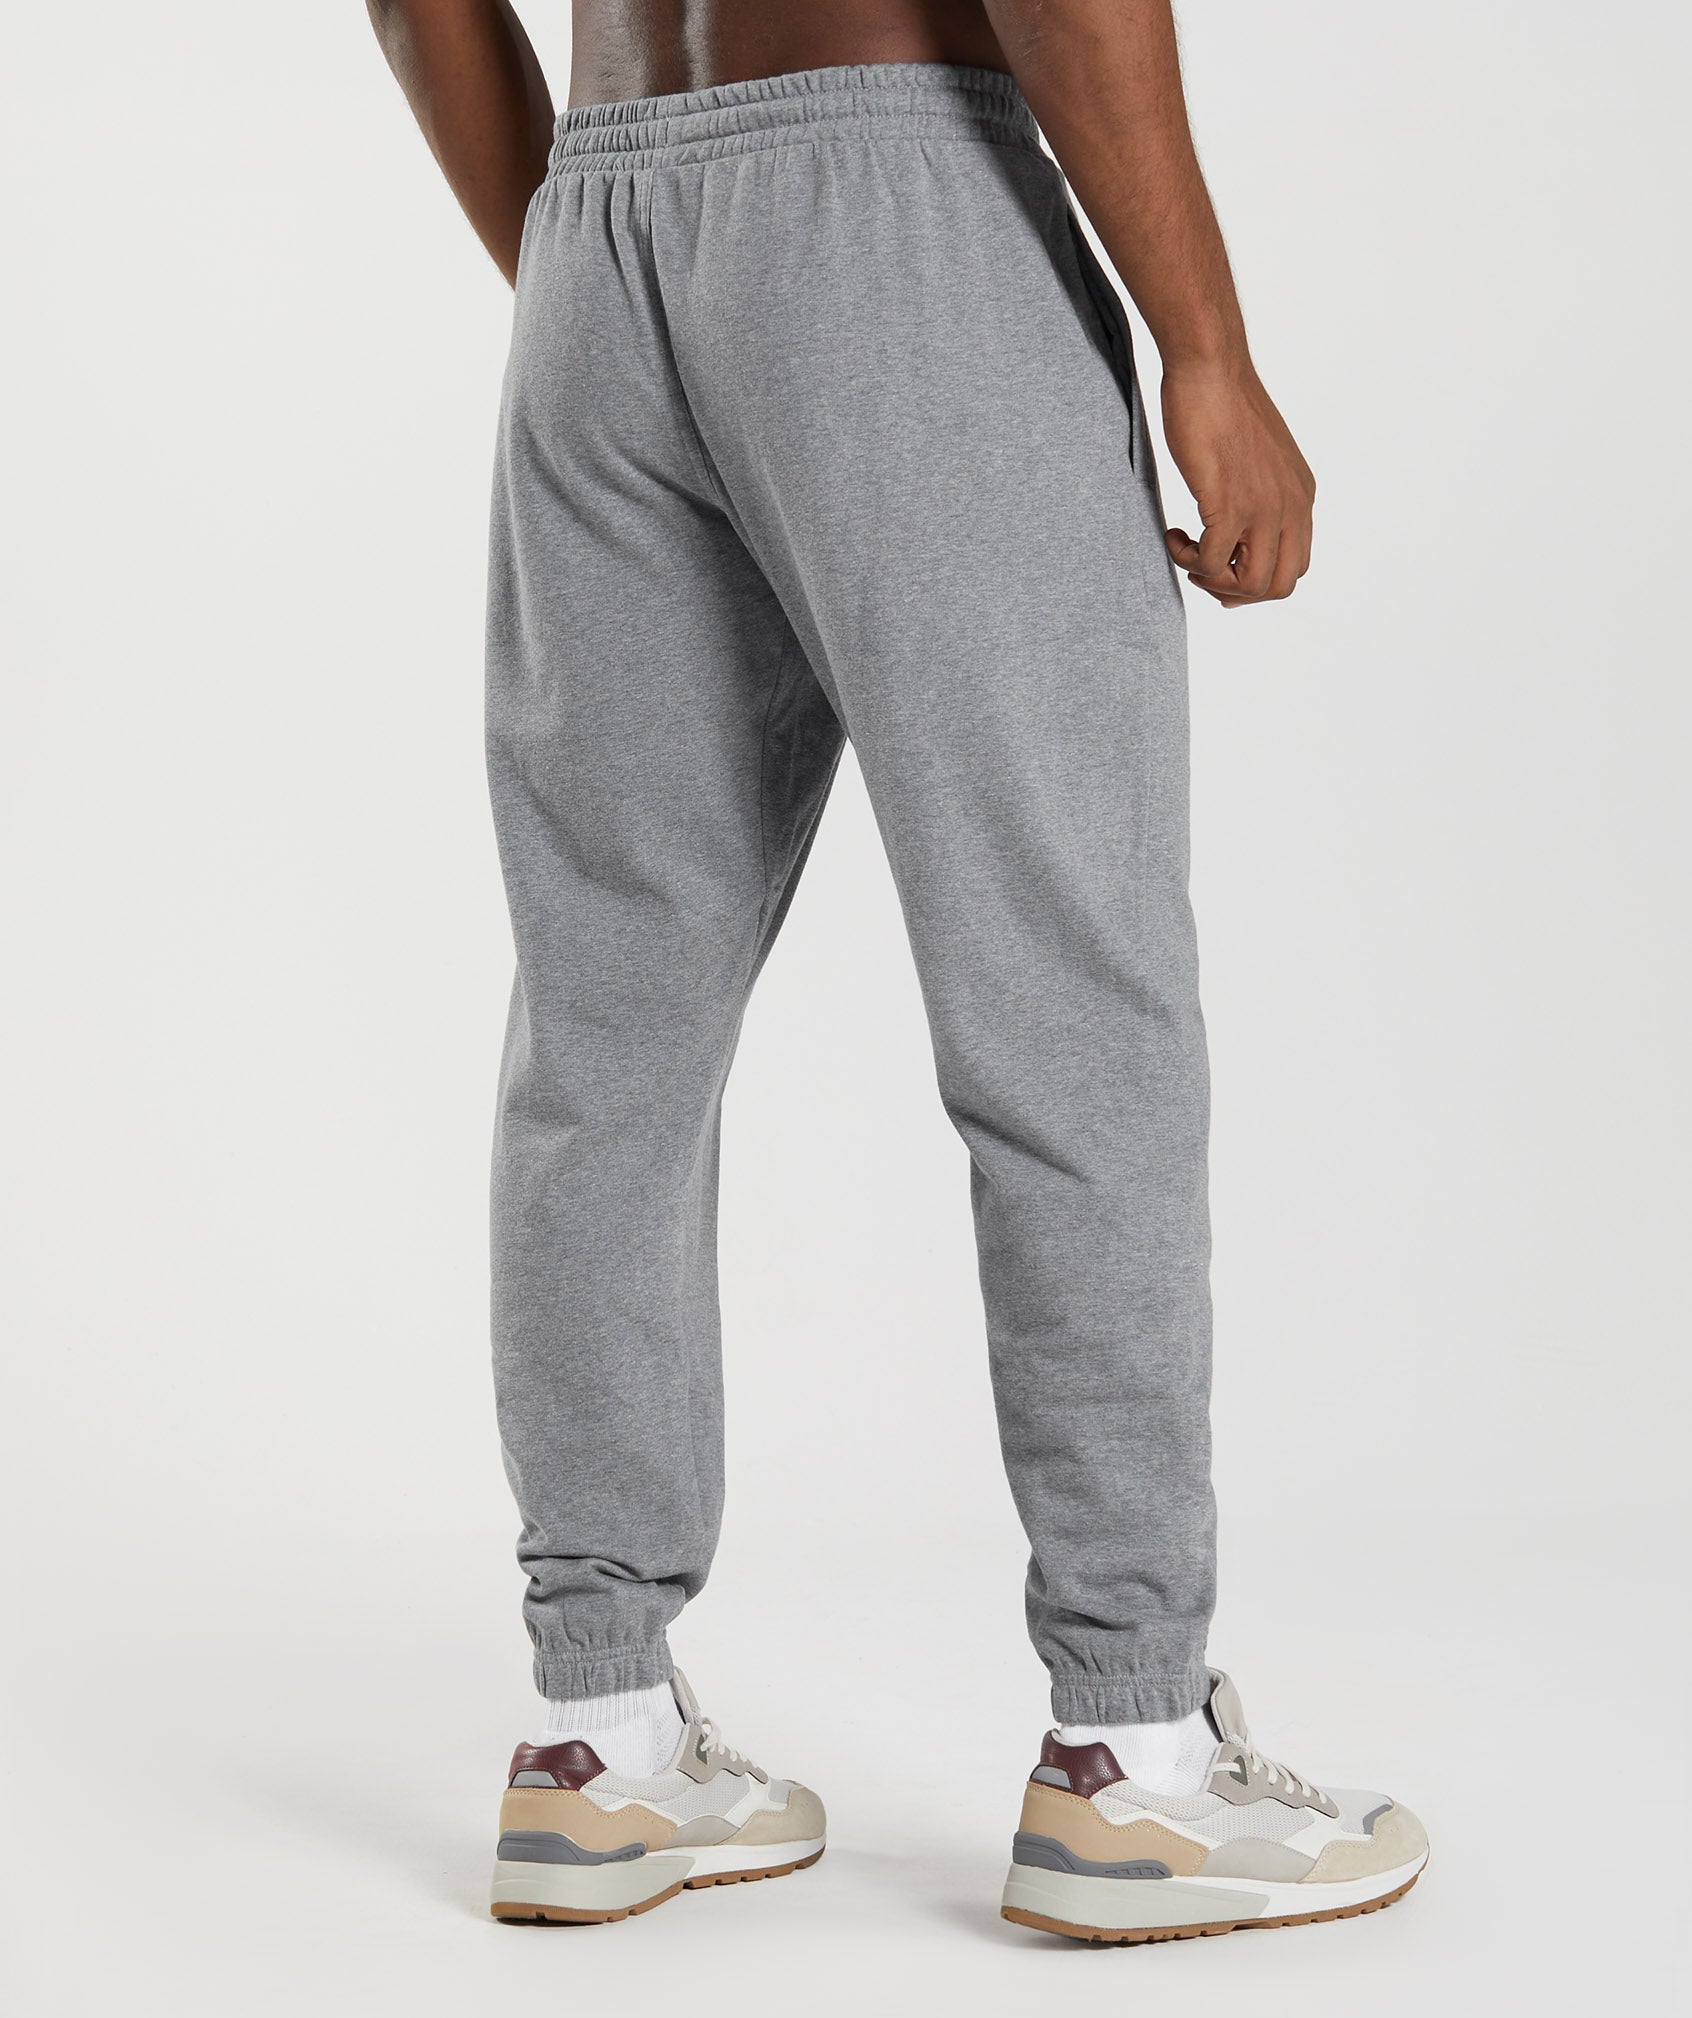 Gymshark Joggers Size Medium - $38 - From Enid